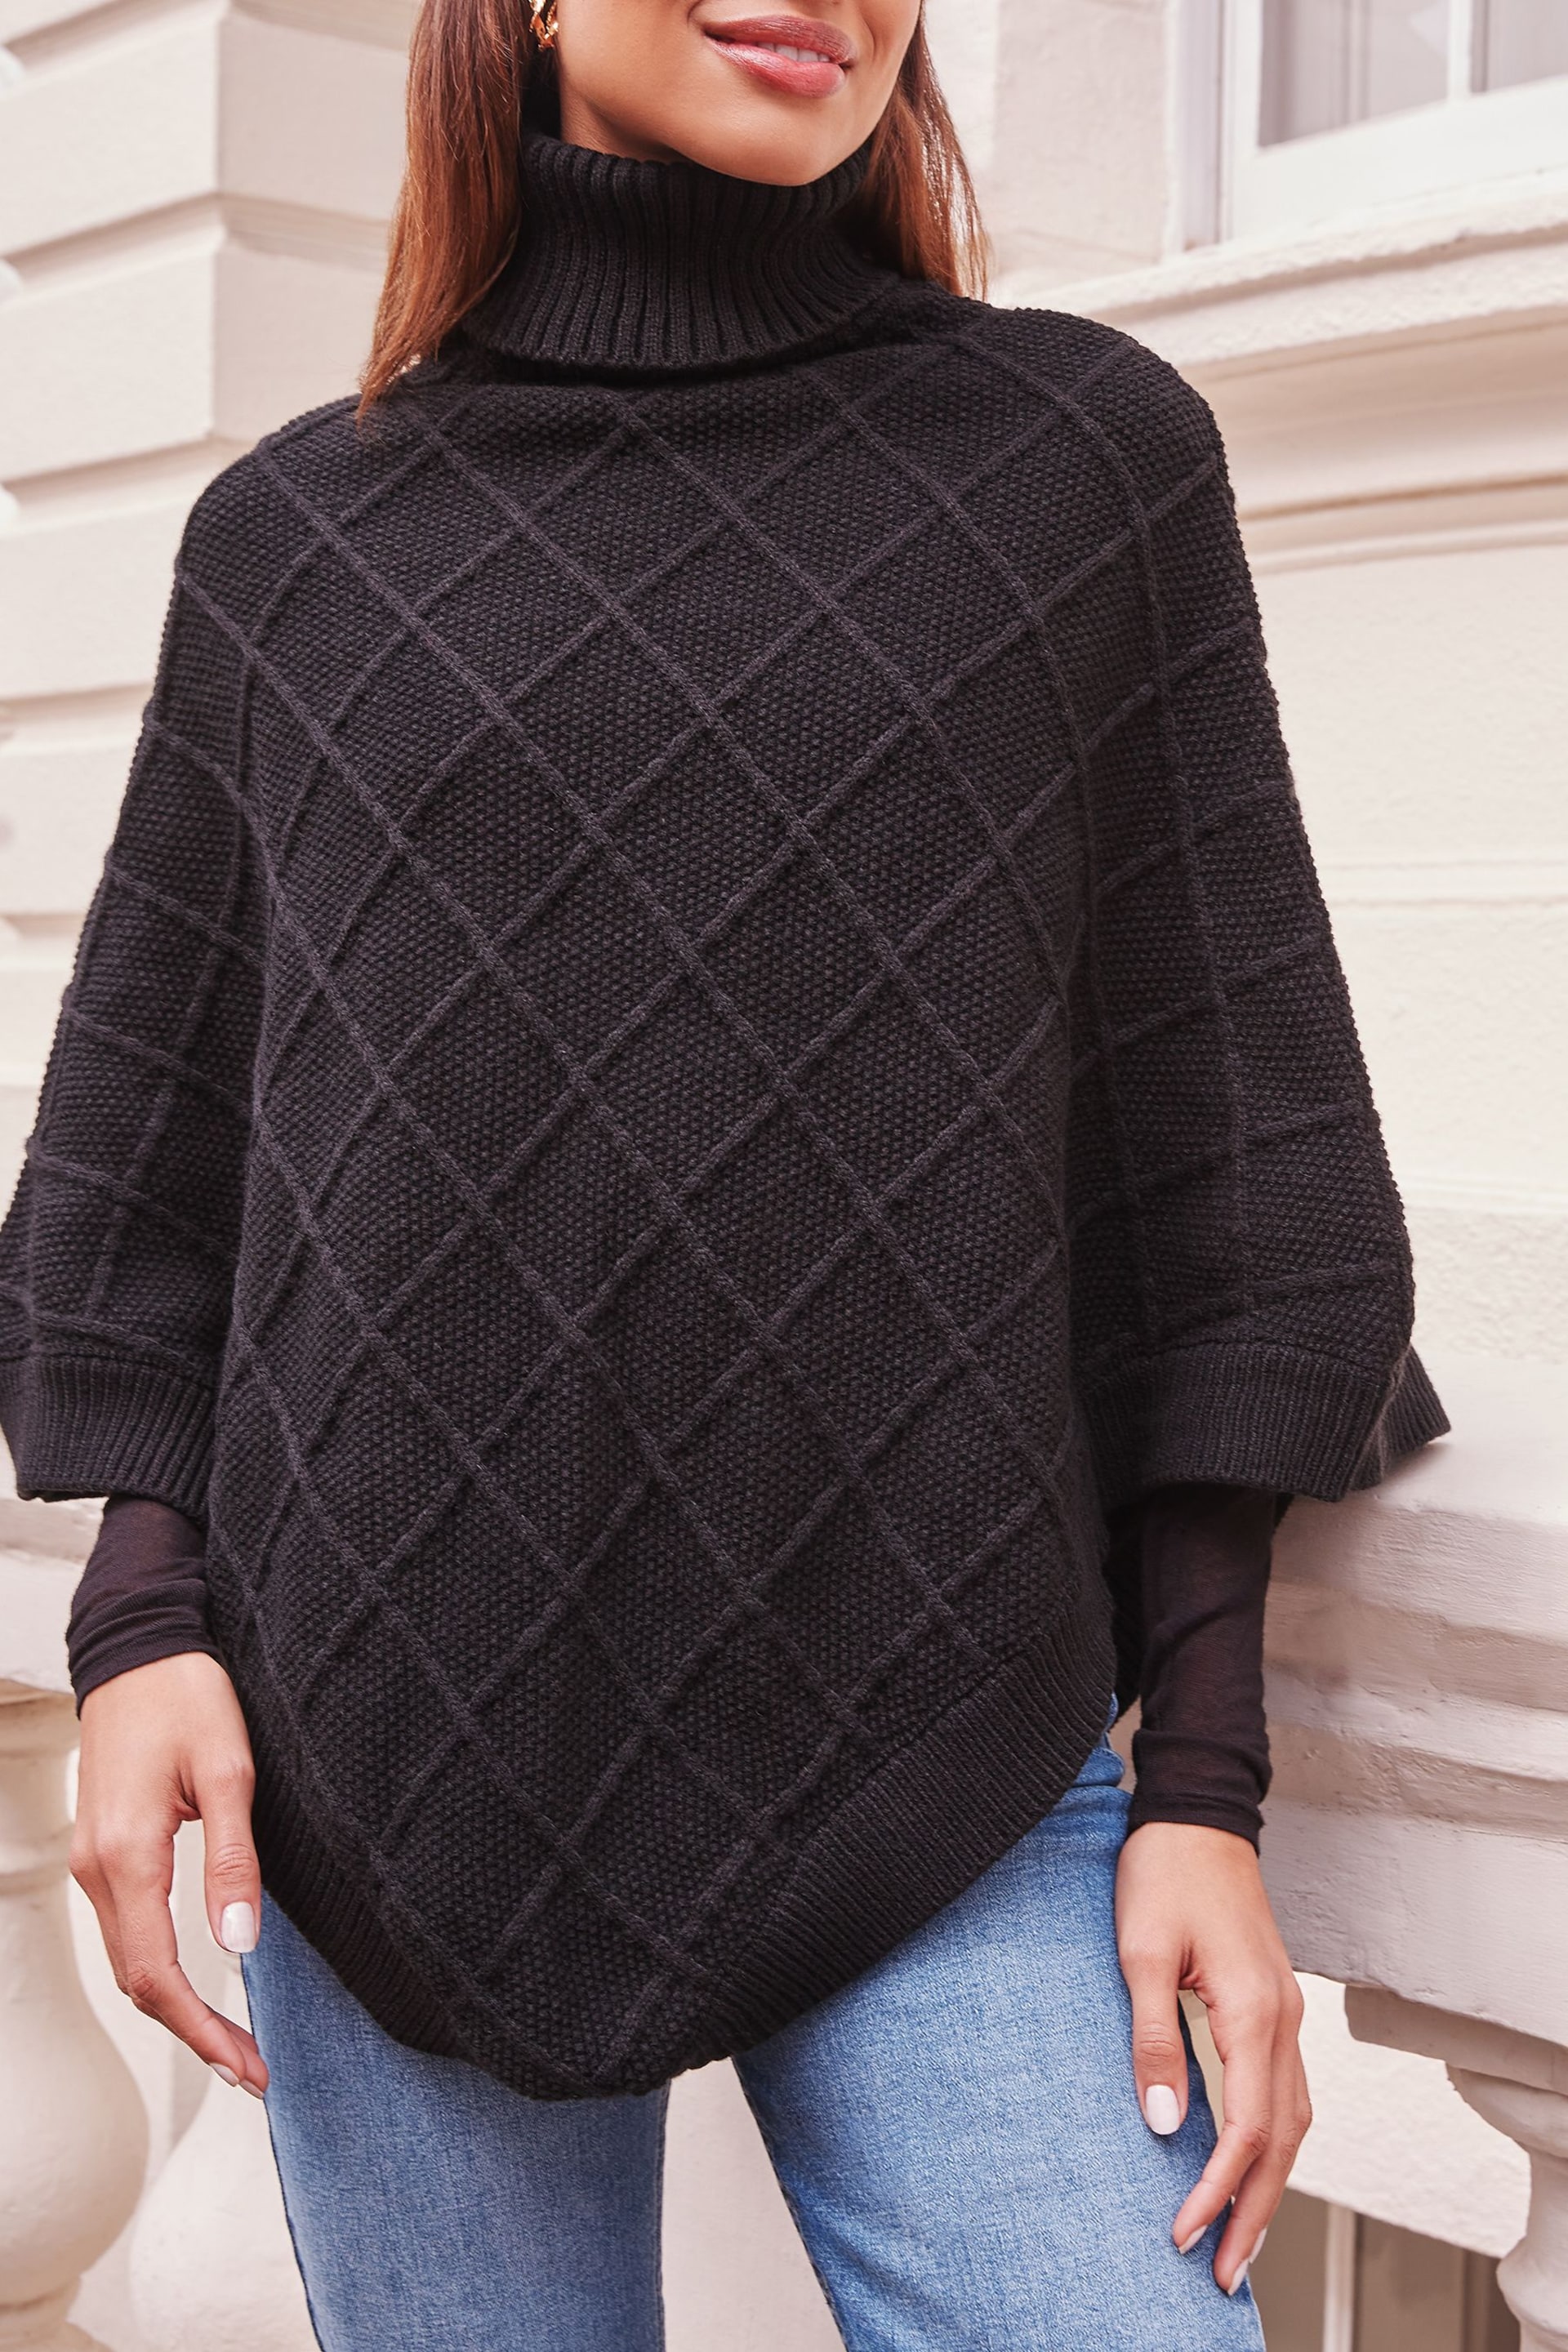 Lipsy Black Cosy Cable Knit Roll Neck Poncho - Image 3 of 4